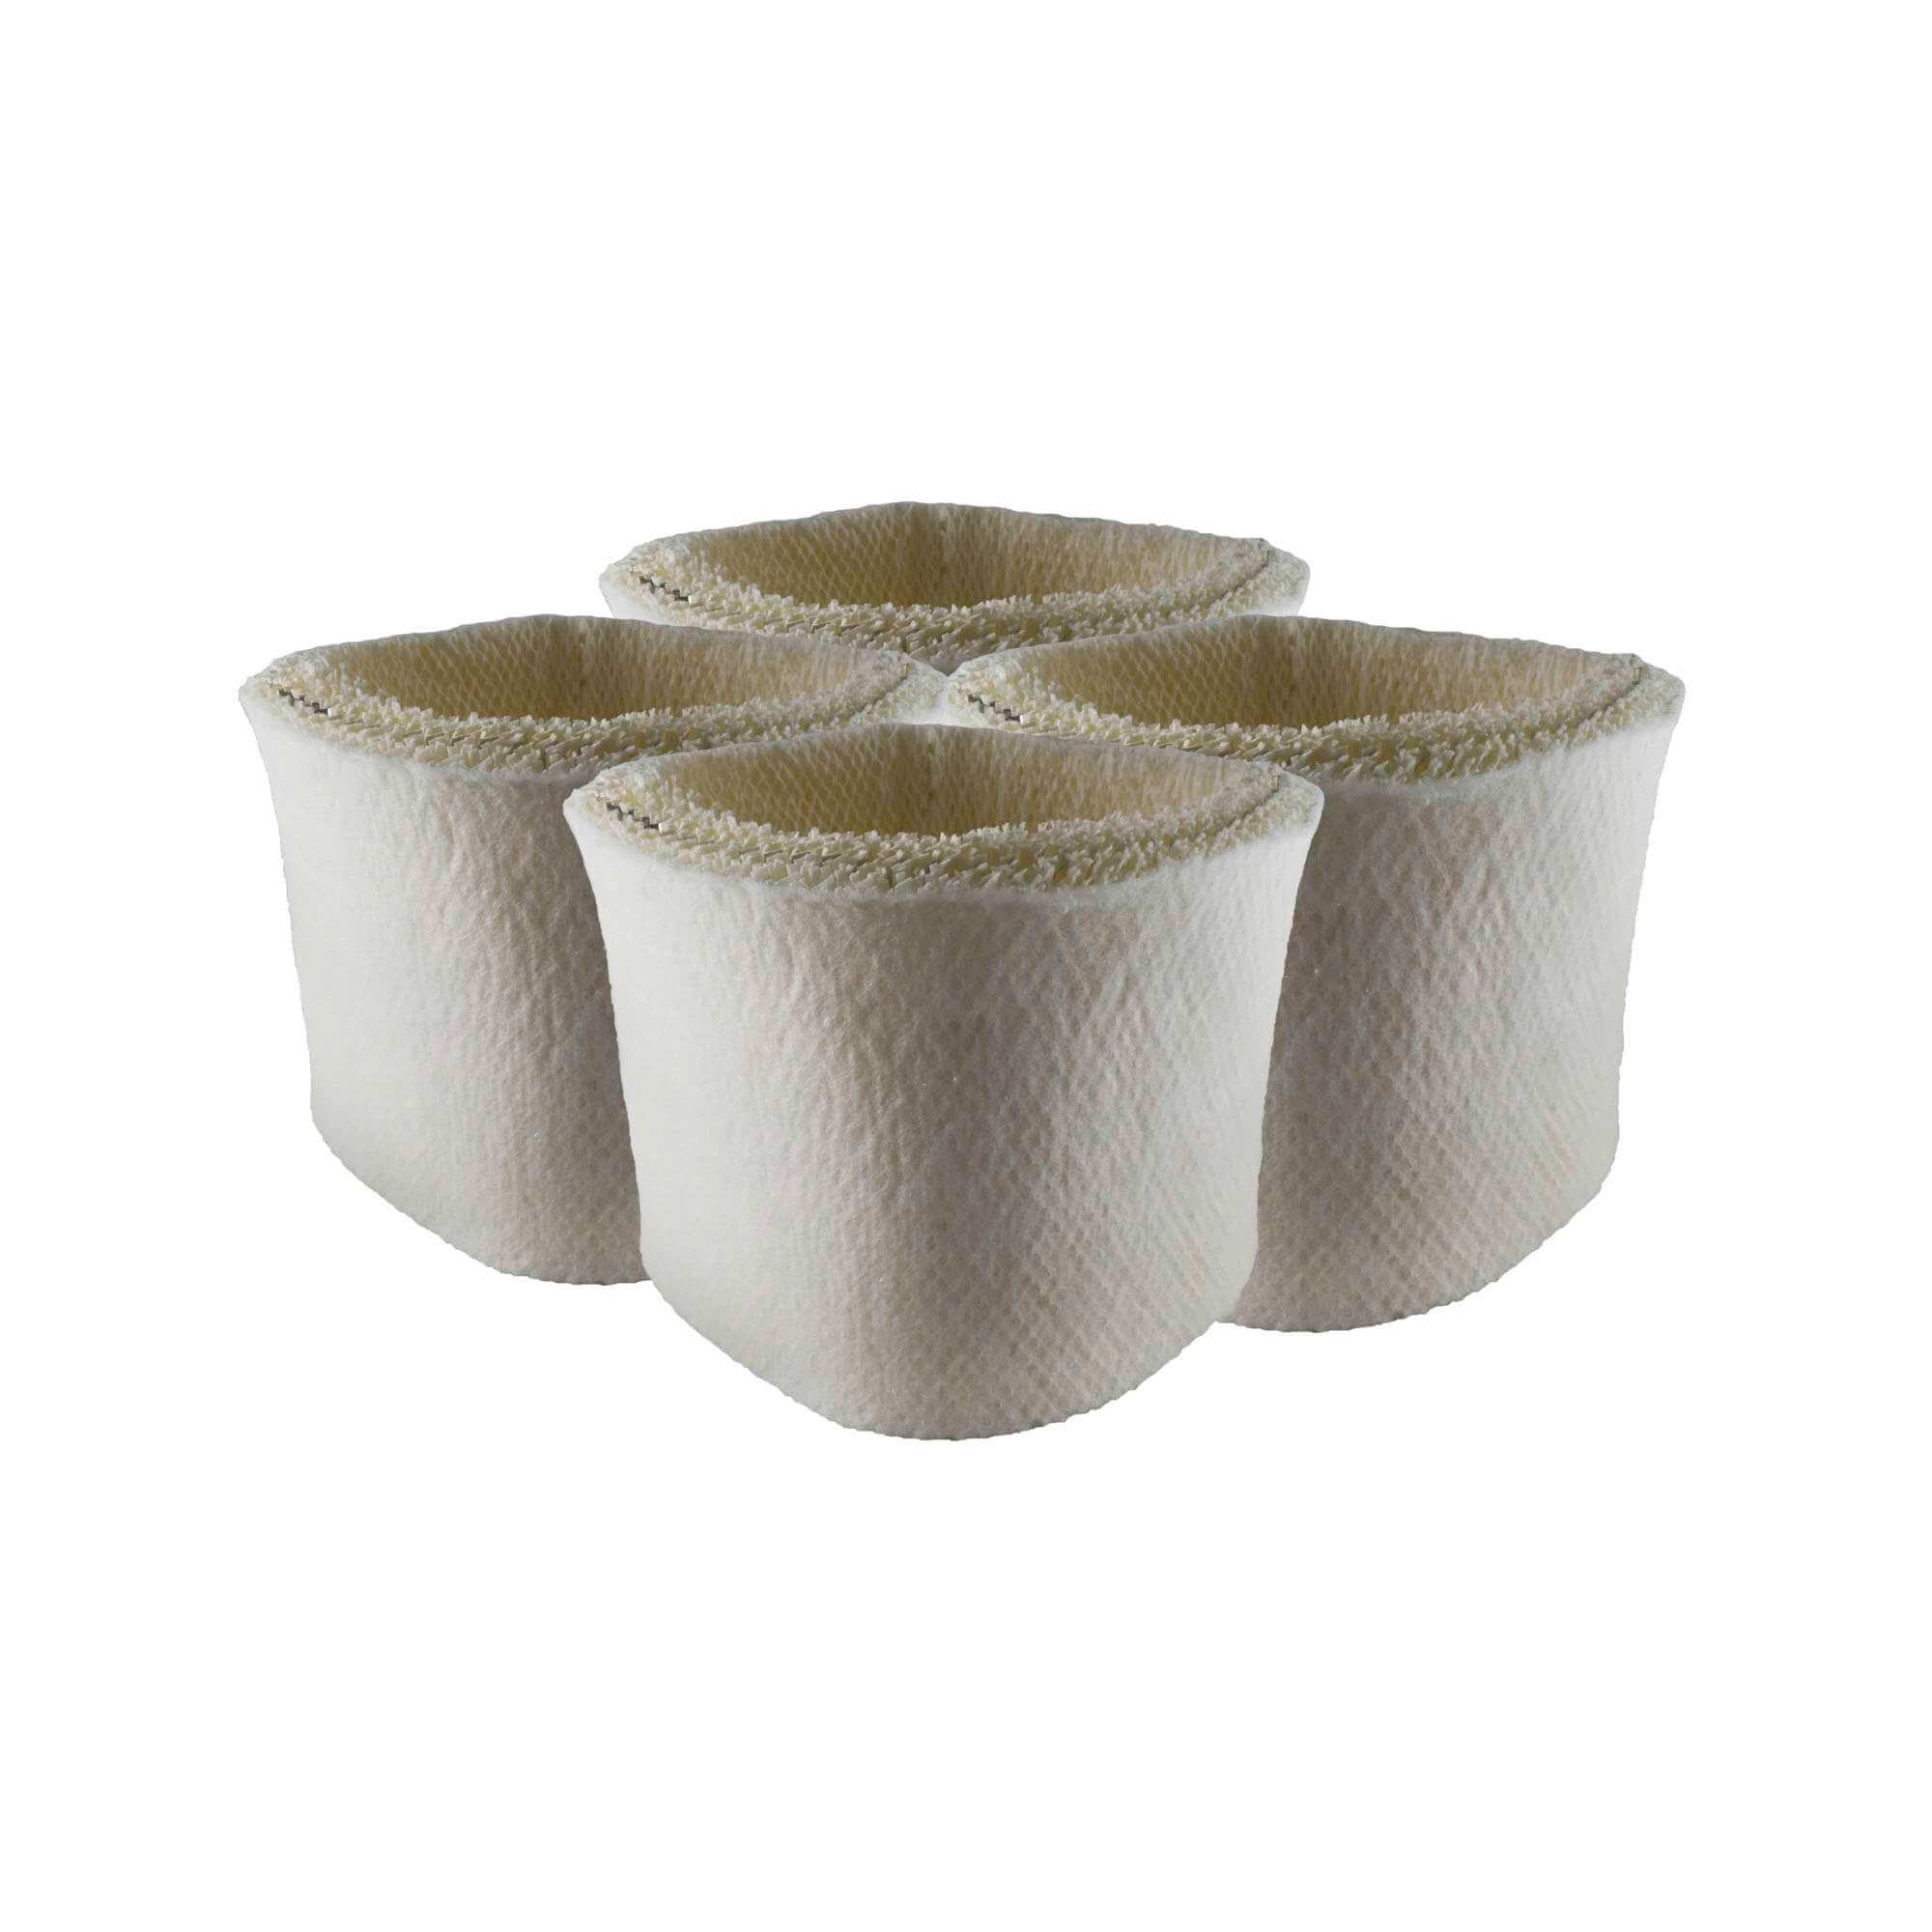 2X Humidifier Filter for Honeywell HCM-6009 